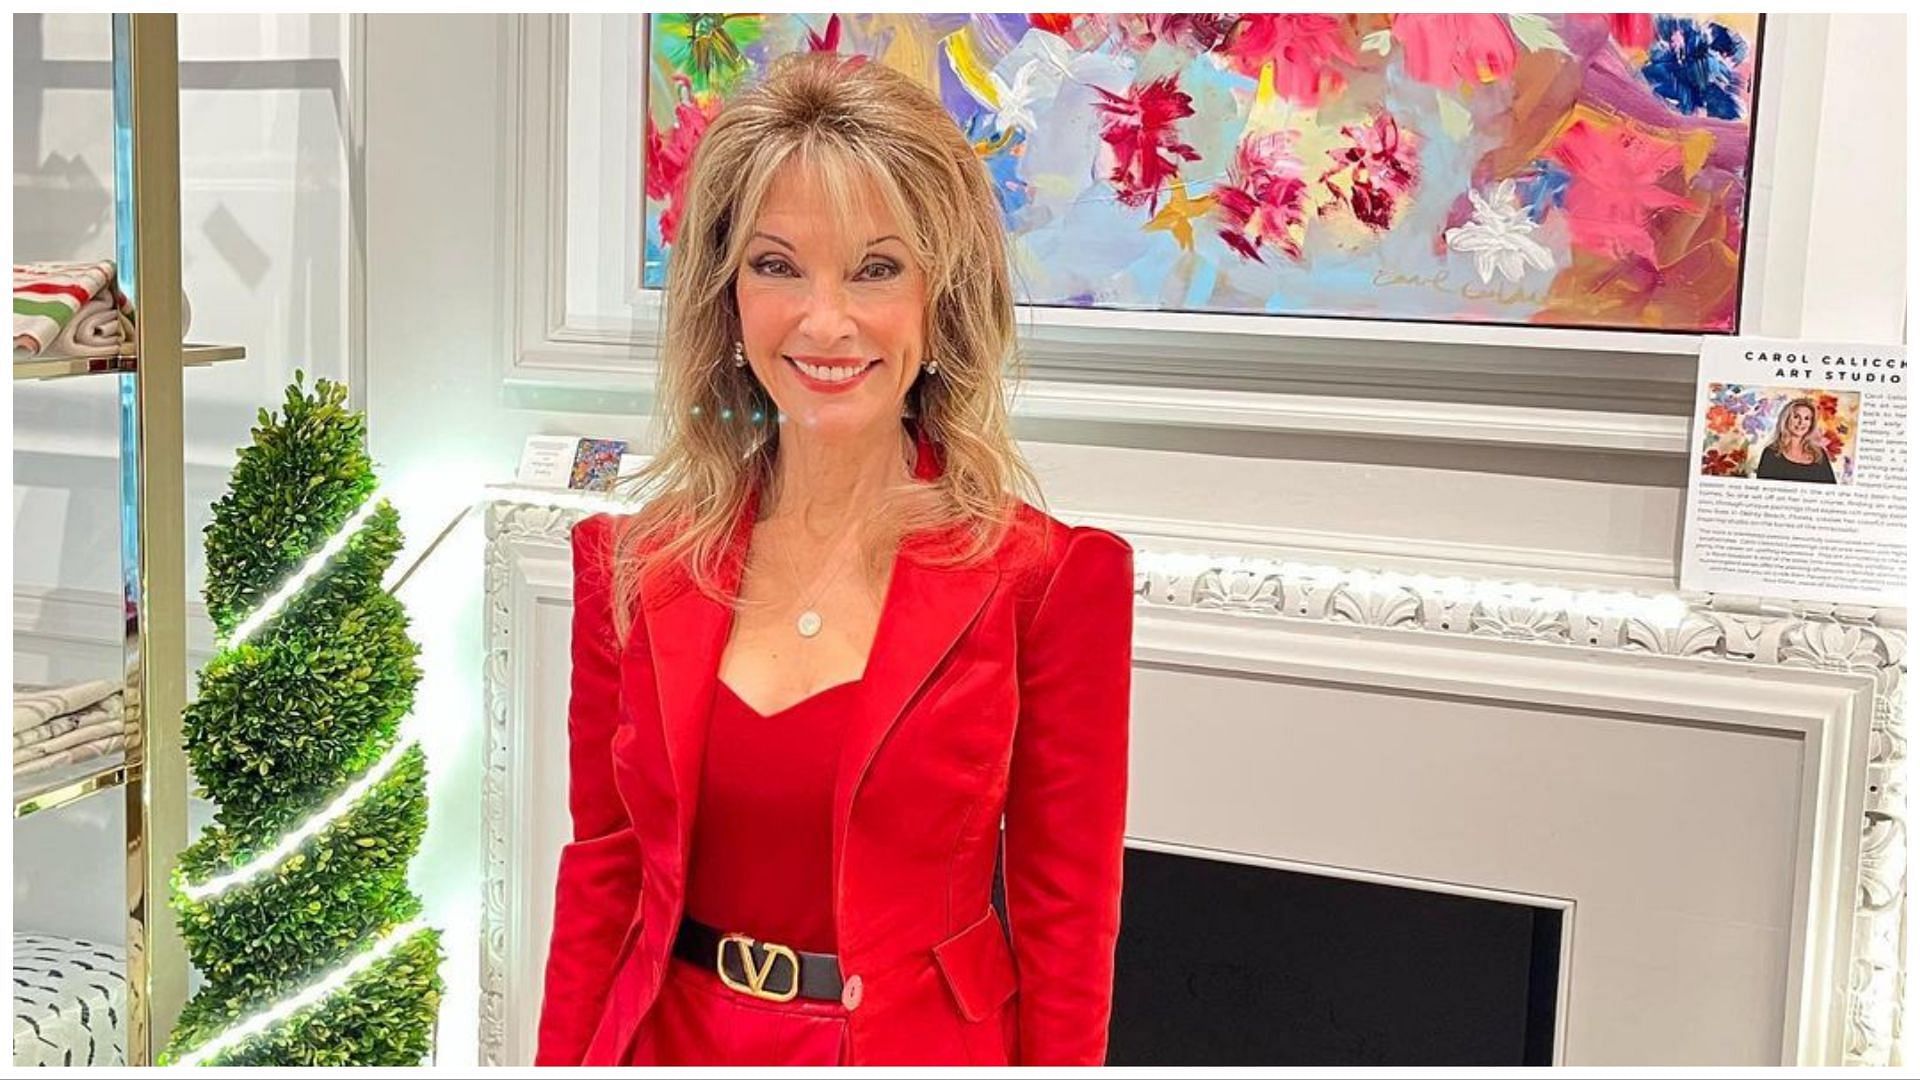 Susan Lucci is doing fine after her heart surgeries. (Image via Instagram @therealsusanlucci)